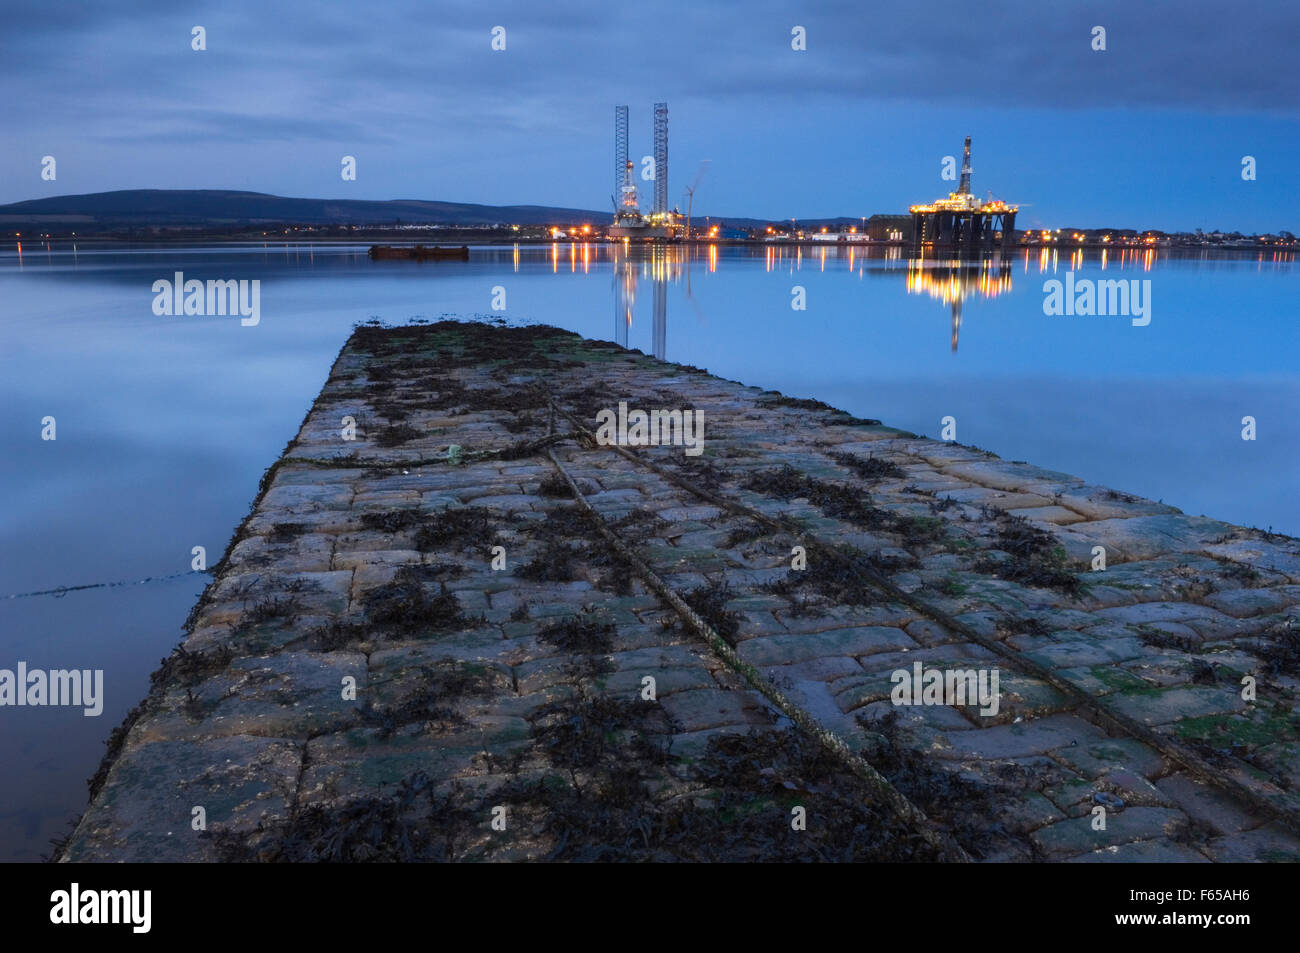 Invergordon with oil rigs at night from the slipway at Balblair on the Black Isle, Ross-shire, Scotland. Stock Photo